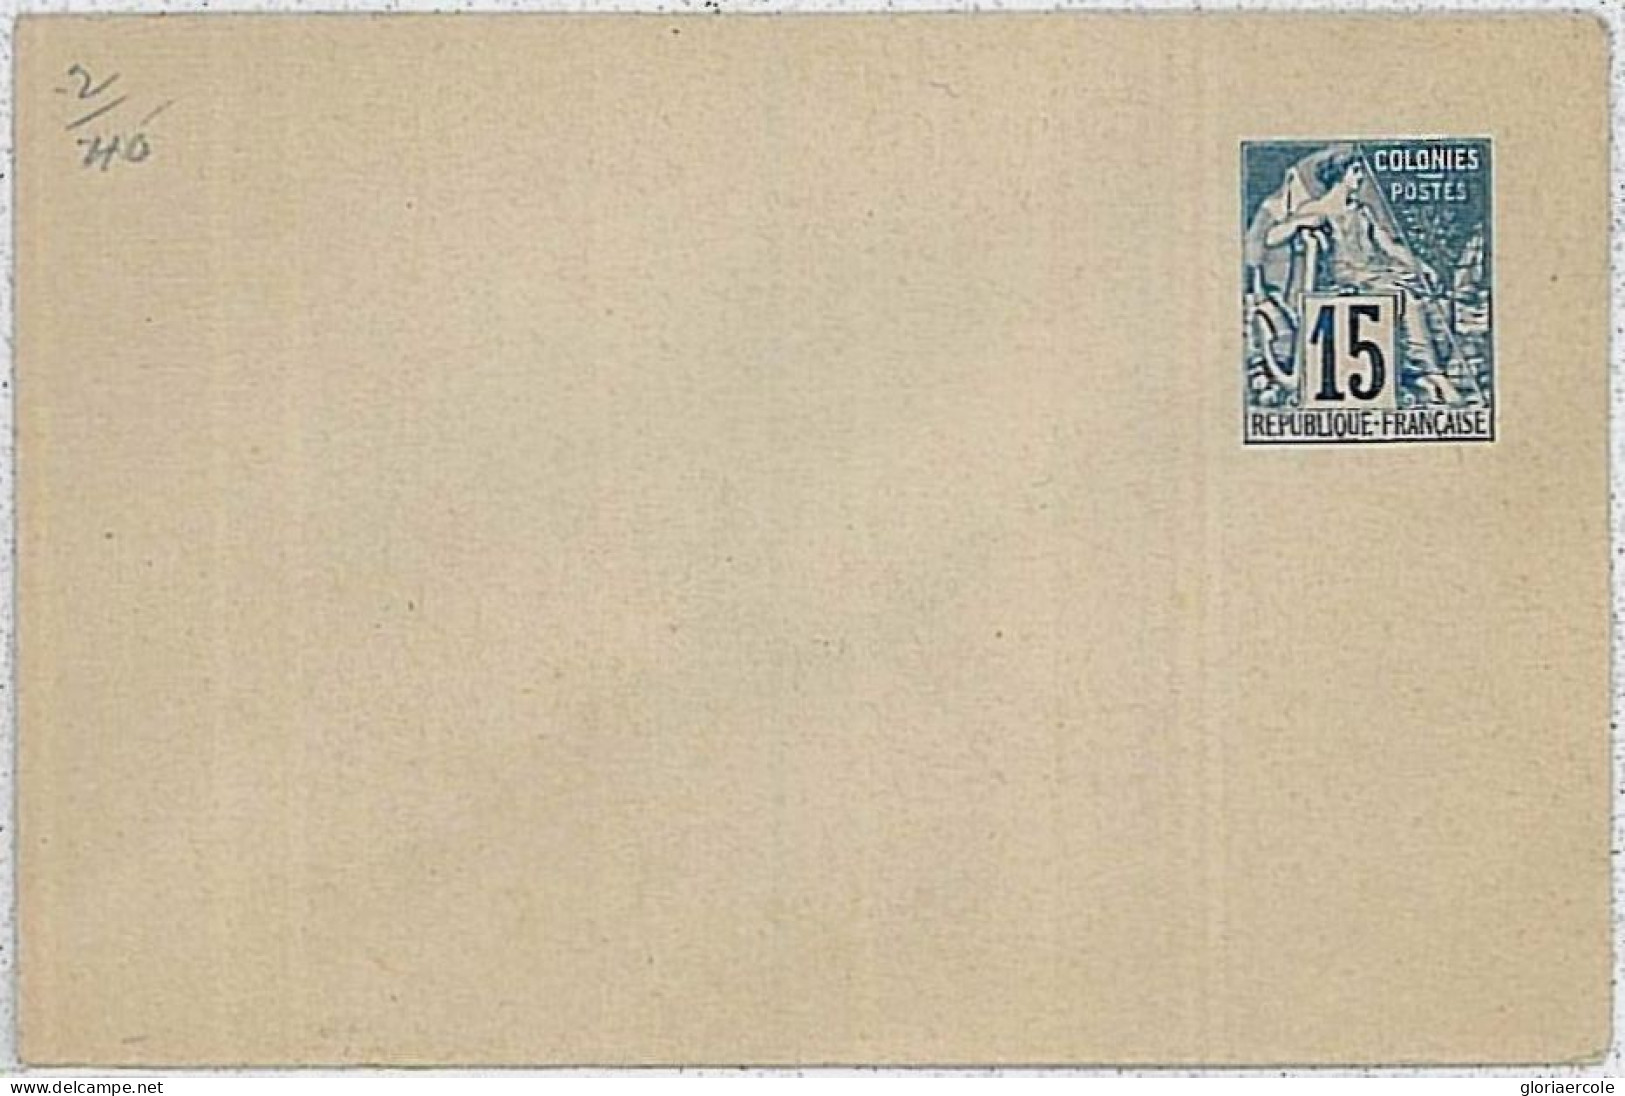 24181 -  COLONIES FRANCAISES  - POSTAL STATIONERY CARD - HIGGINGS & GAGE # 2 - Non Classés